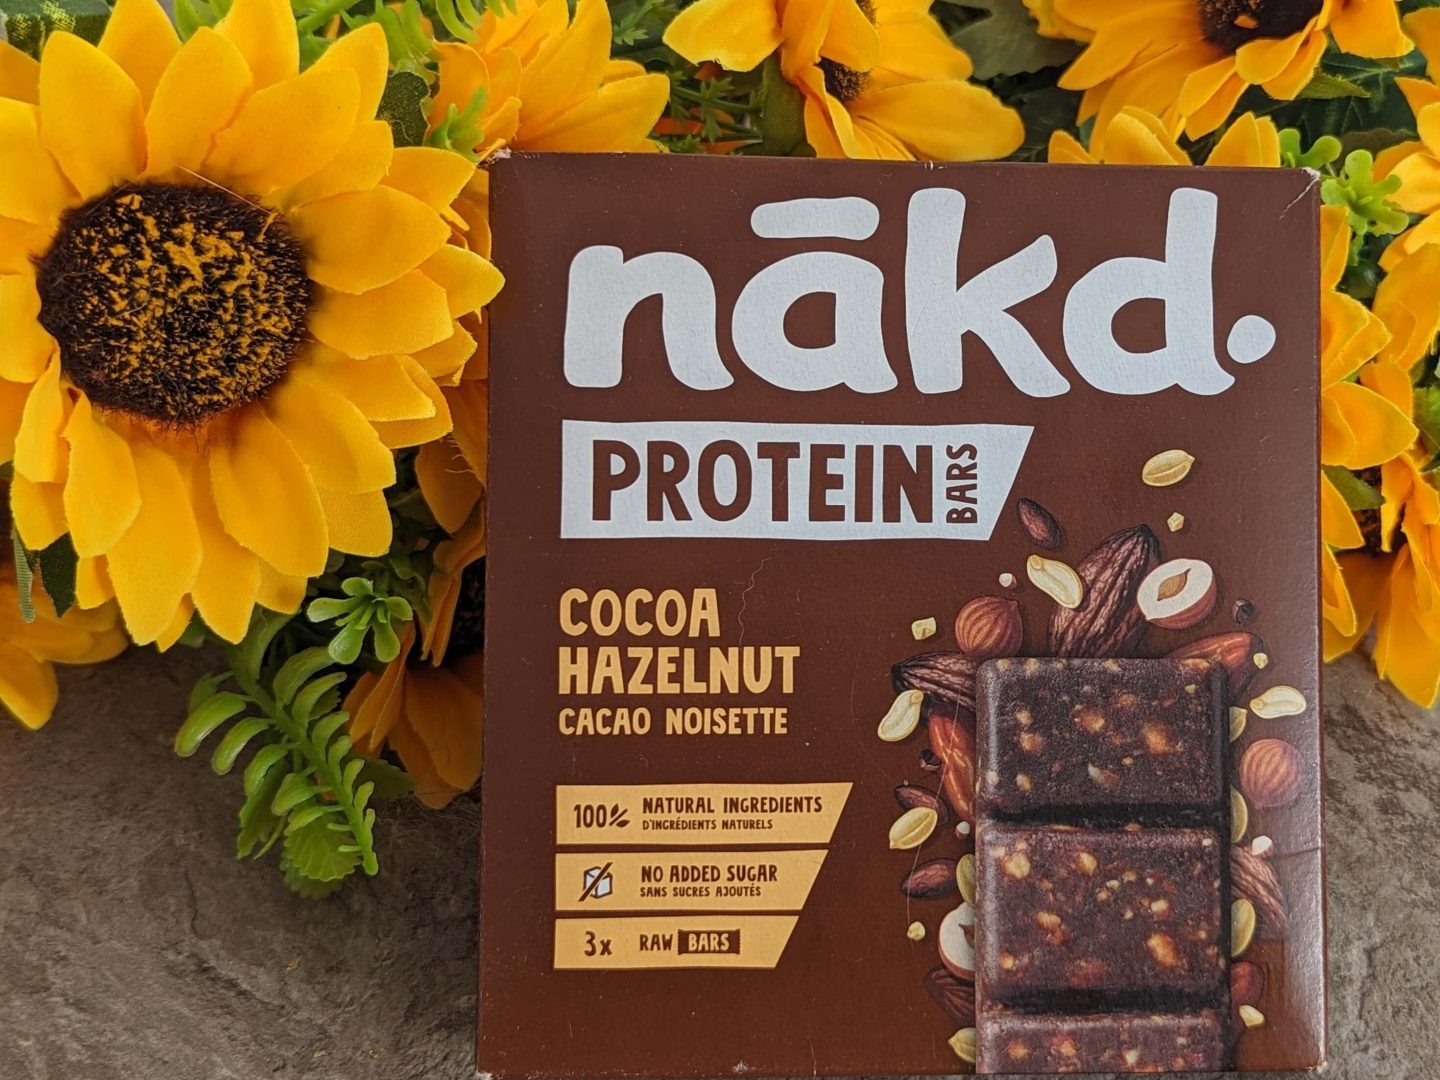 Pack of nakd vegan protein bars in cocoa and hazelenut flavour displayed against a bunch of sunflowers.